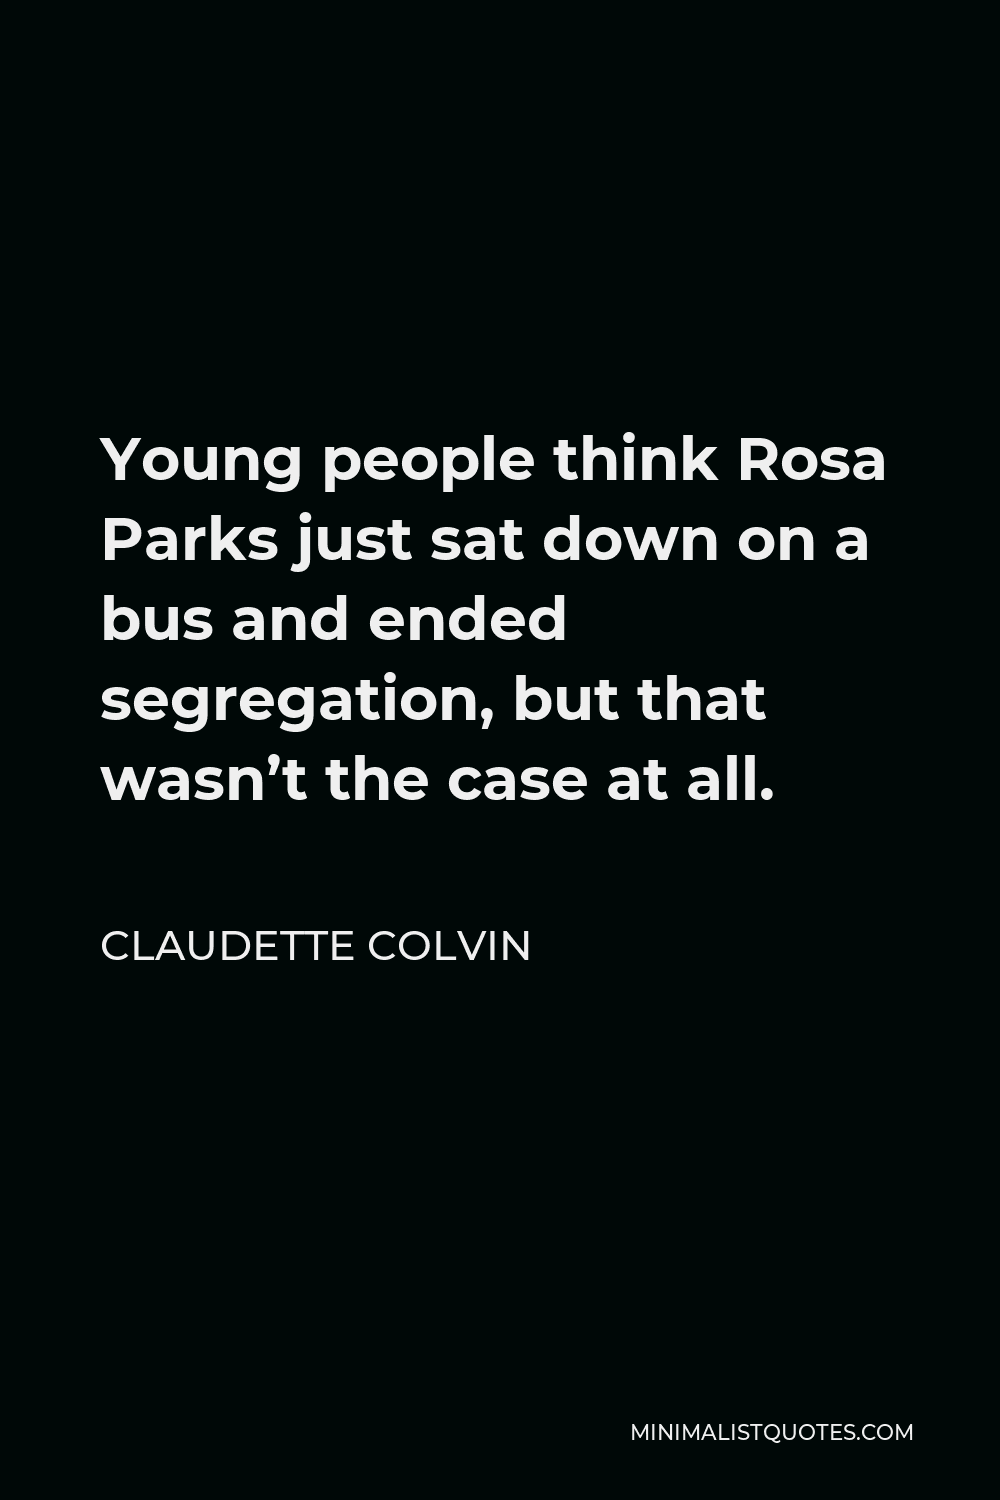 Claudette Colvin Quote - Young people think Rosa Parks just sat down on a bus and ended segregation, but that wasn’t the case at all.